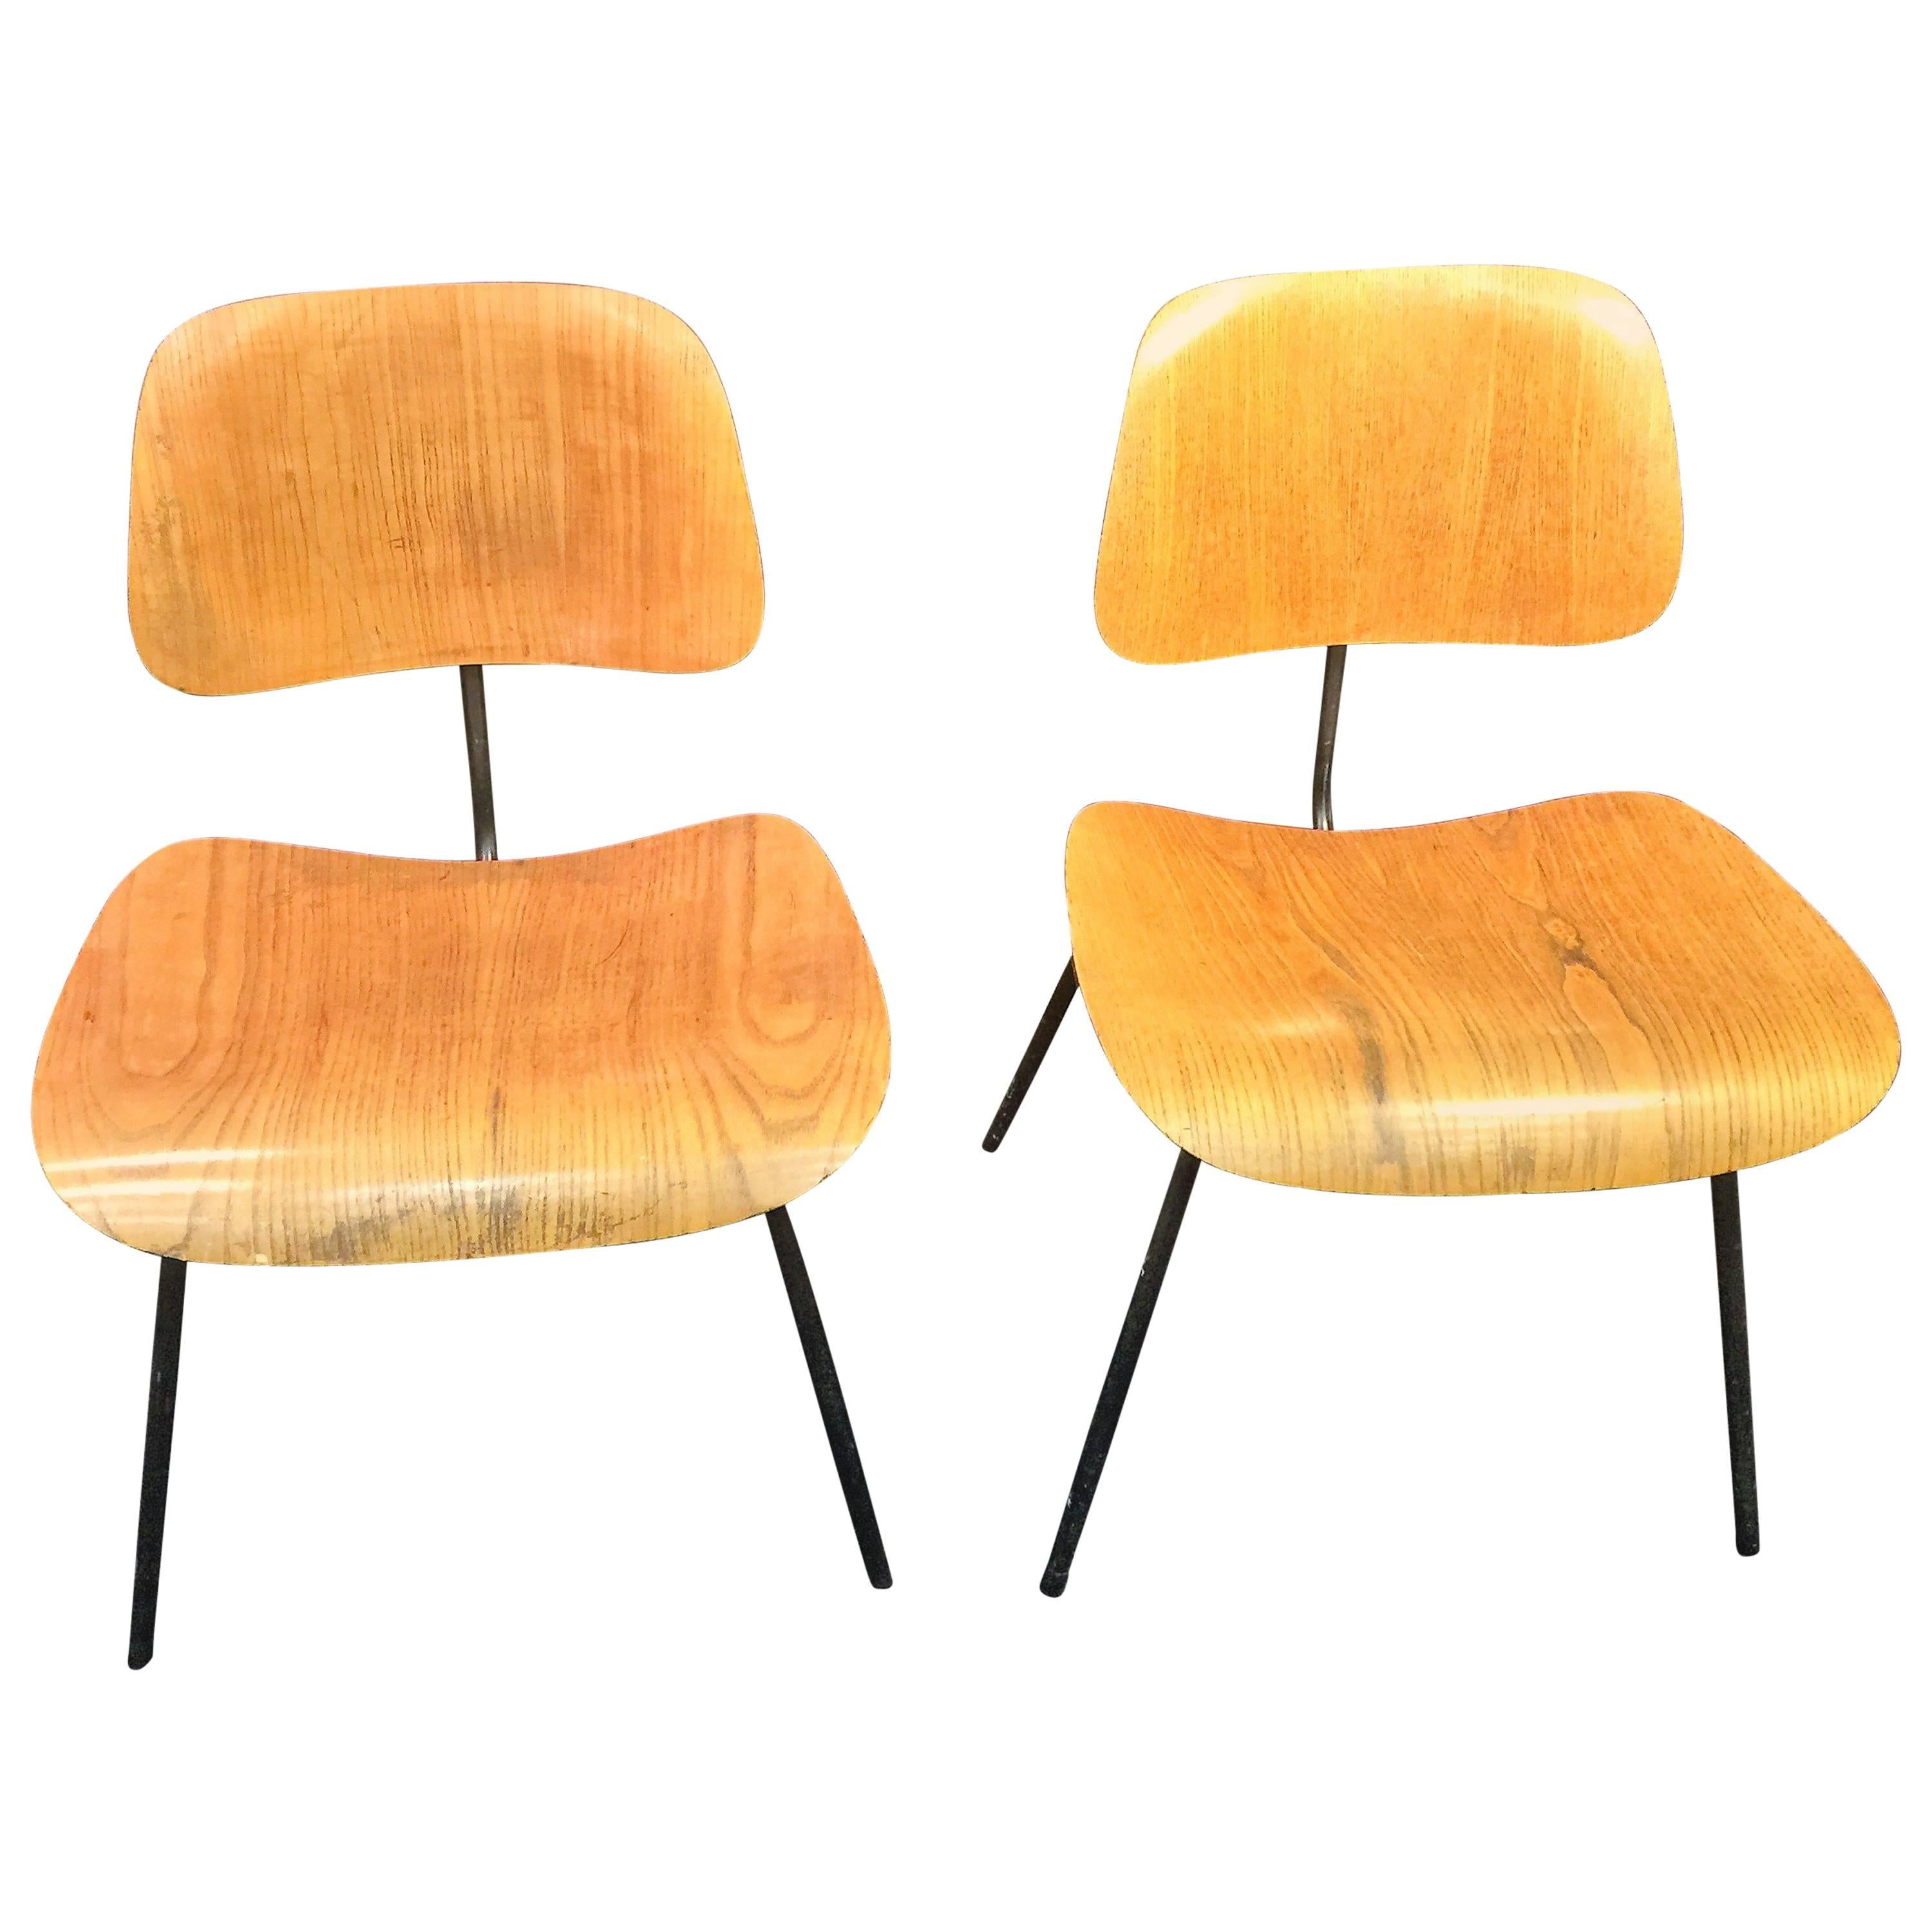 Pair of Early Charles Eames DCM Dining Chairs by Herman Miller